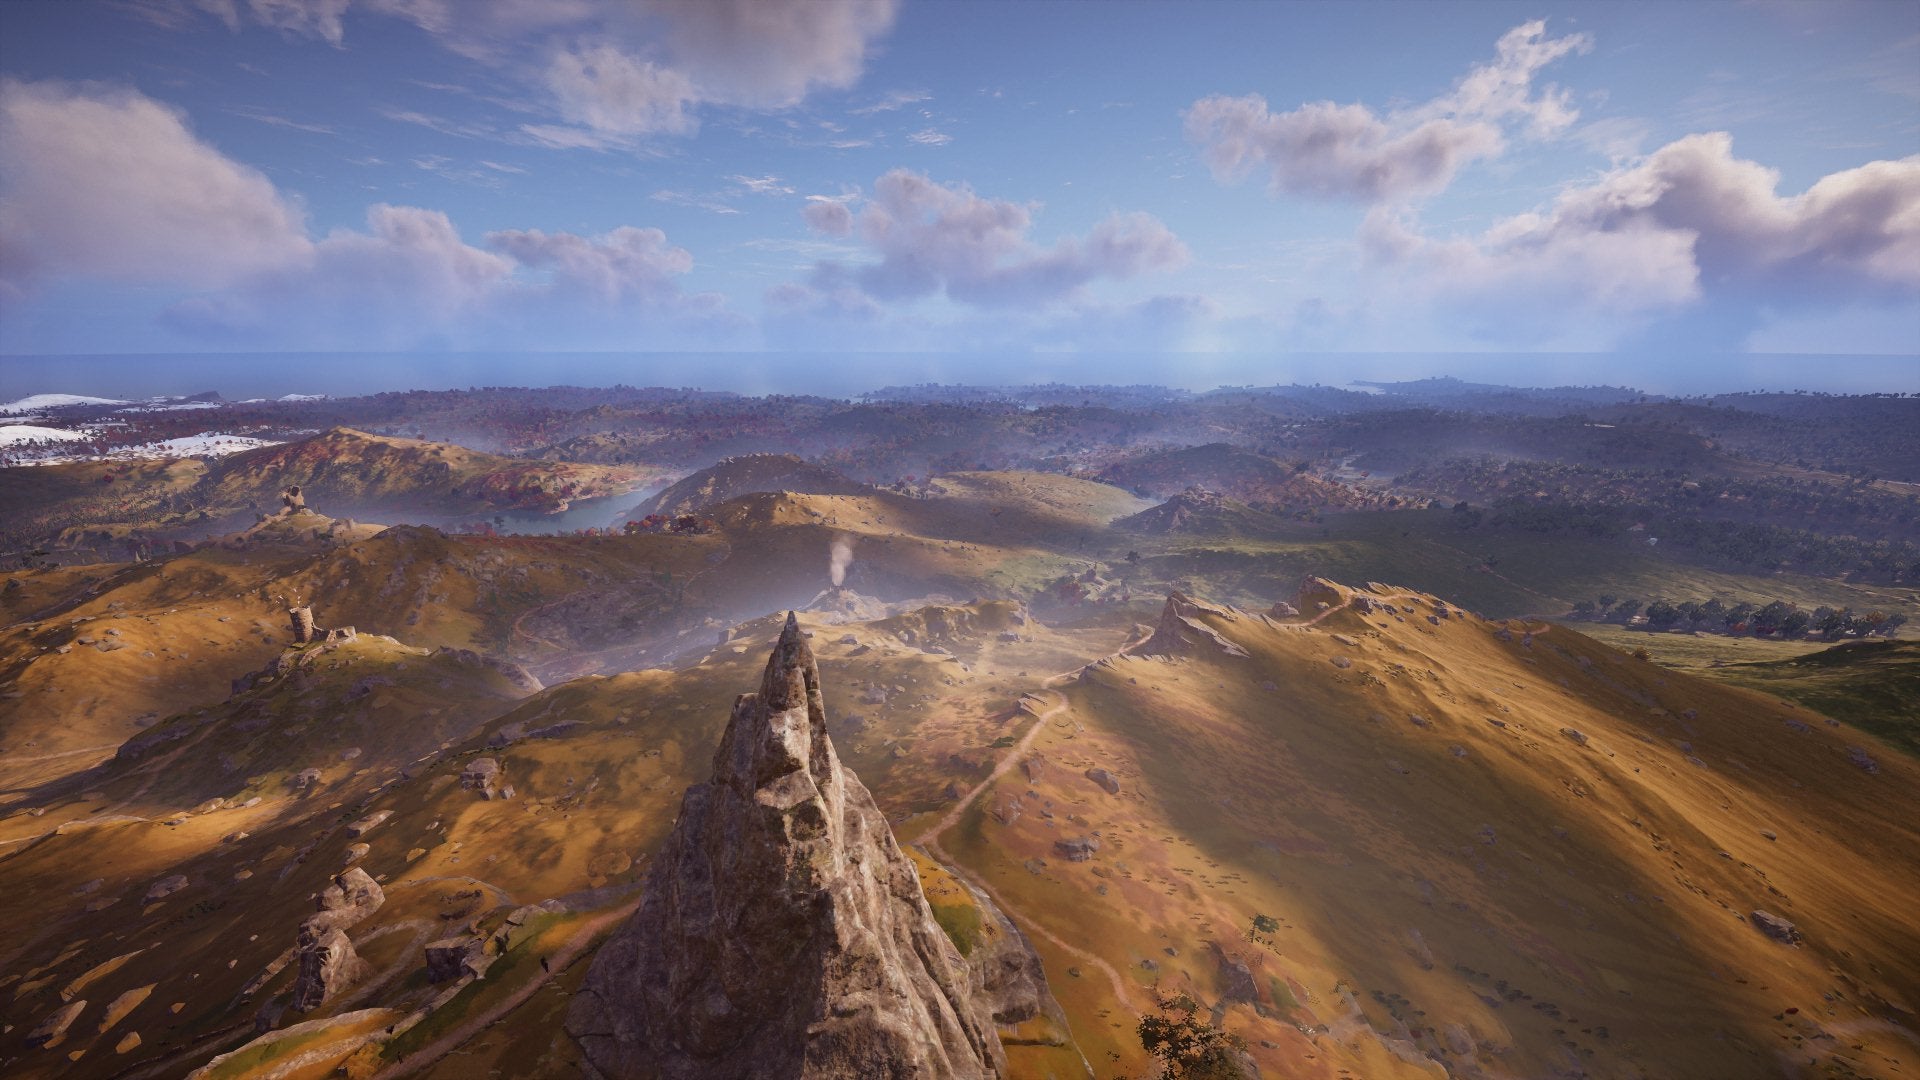 Assassin's Creed Valhalla map: A complete look at every county in England